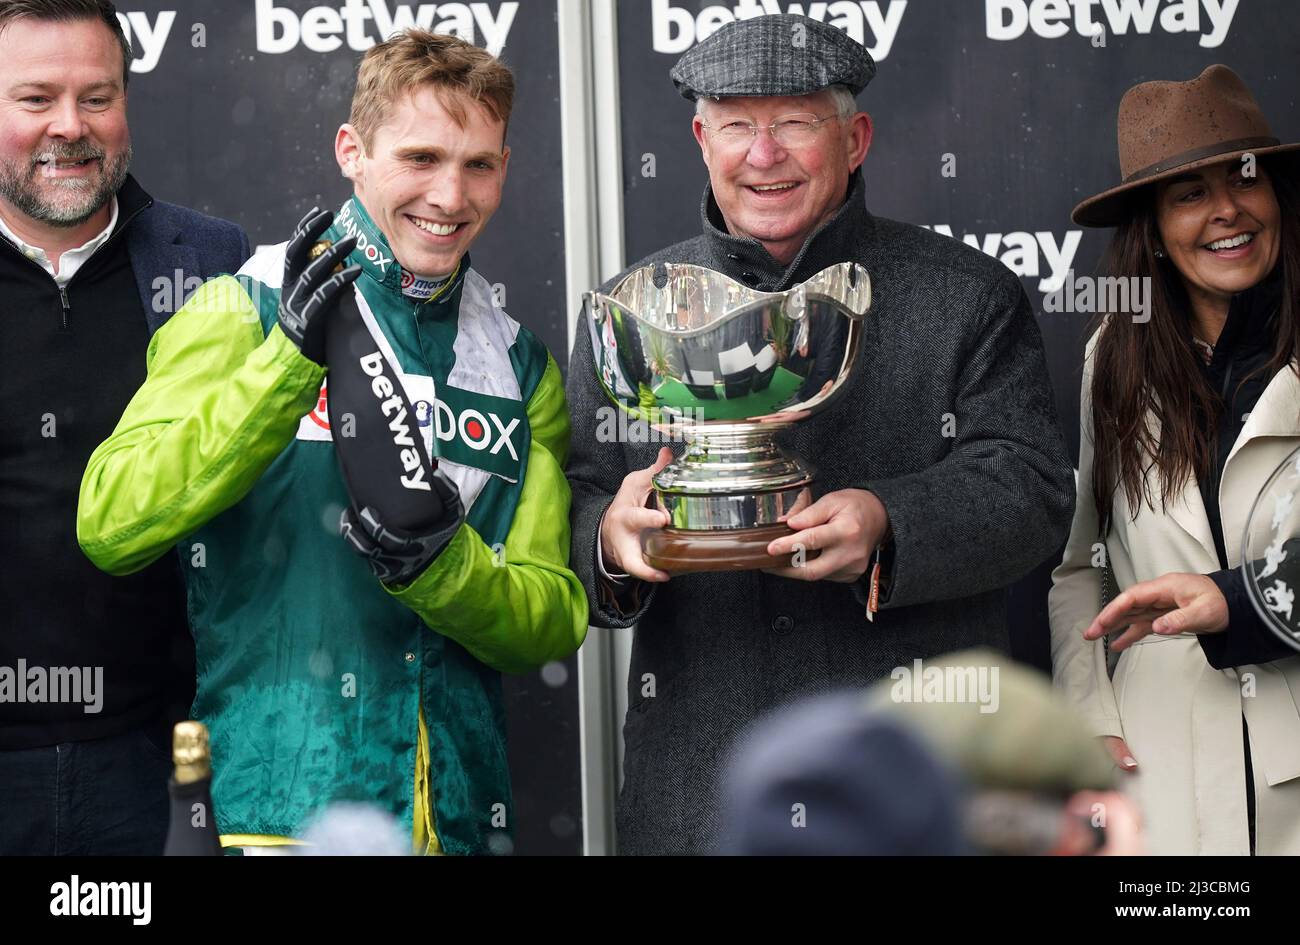 Sir Alex Ferguson celebrates with the Betway Bowl Chase trophy after his horse Clan Des Obeaux ridden by Harry Cobden (left) won the Betway Bowl Chase at Aintree Racecourse, Liverpool. Picture date: Thursday April 7, 2022. Stock Photo